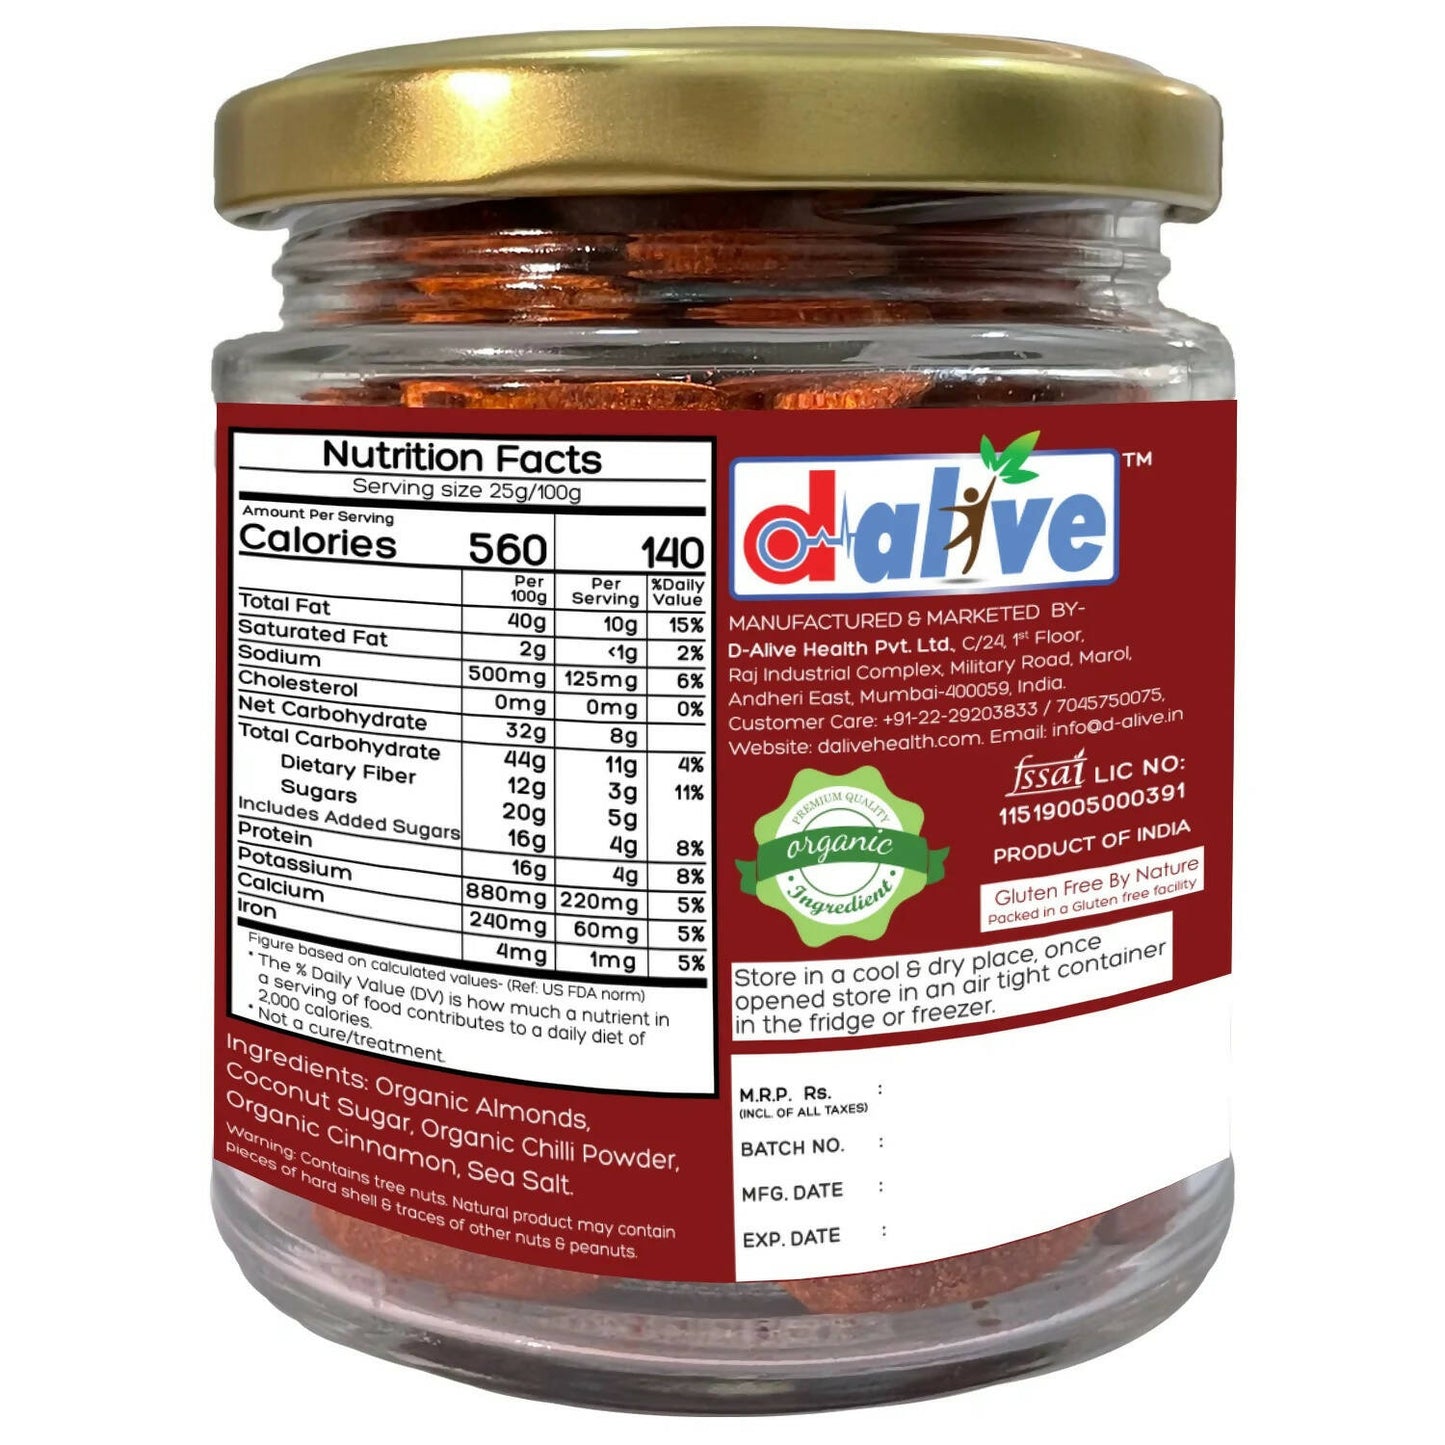 D-Alive Honestly Organic Activated Cinnamon Chilli Almonds